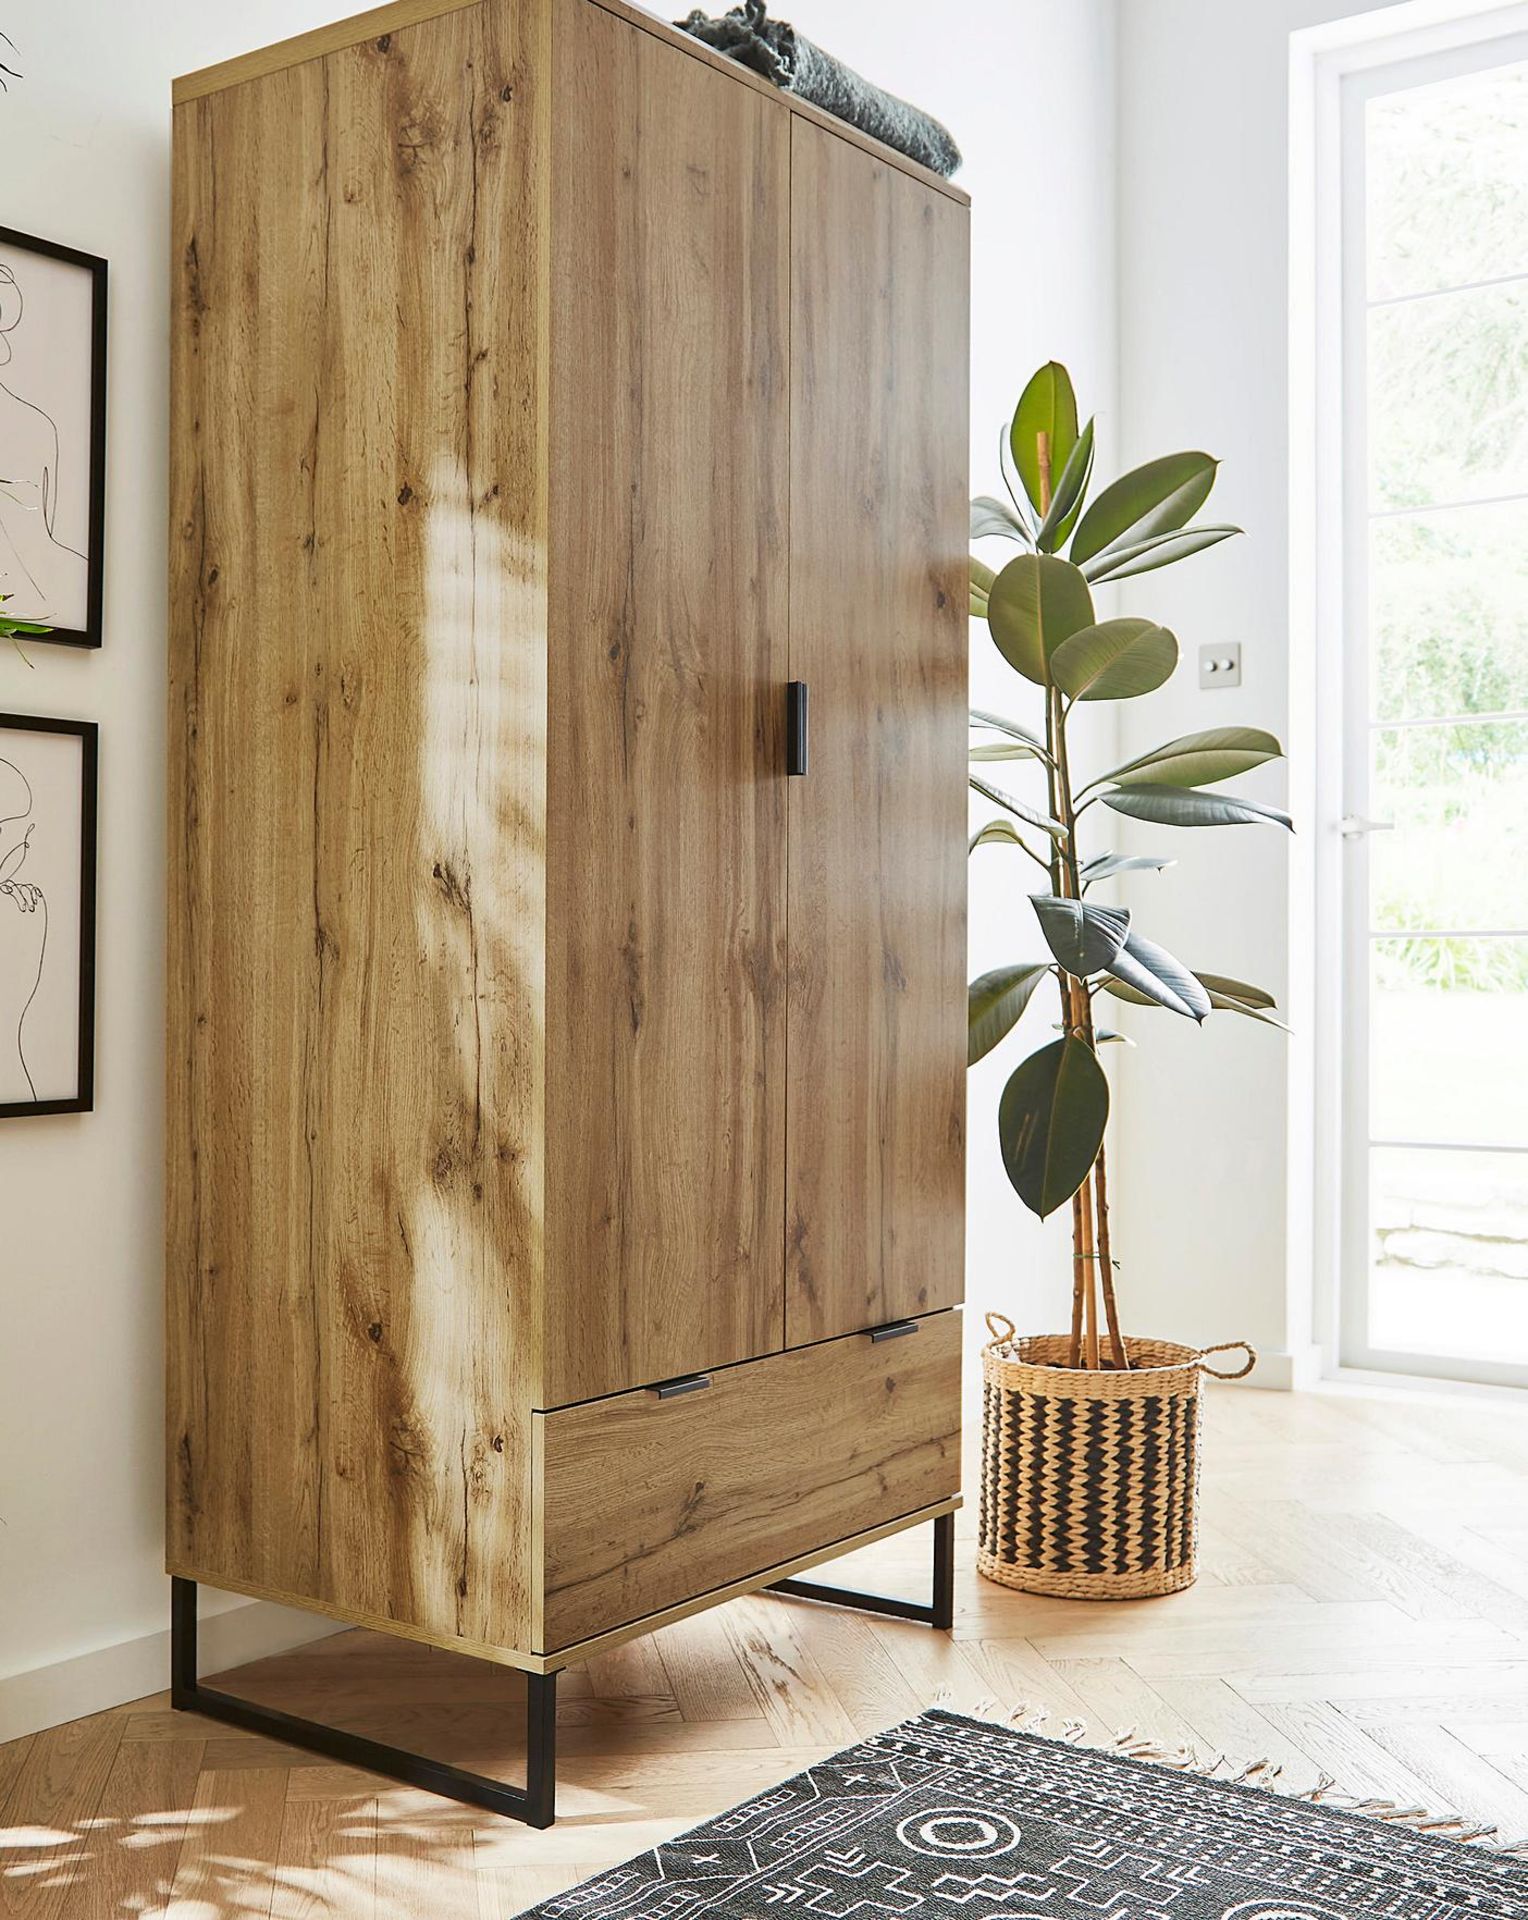 BRAND NEW Oak Shoreditch Wardrobe. RRP £299 EACH. The Shoreditch Range has a contemporary and - Image 2 of 3